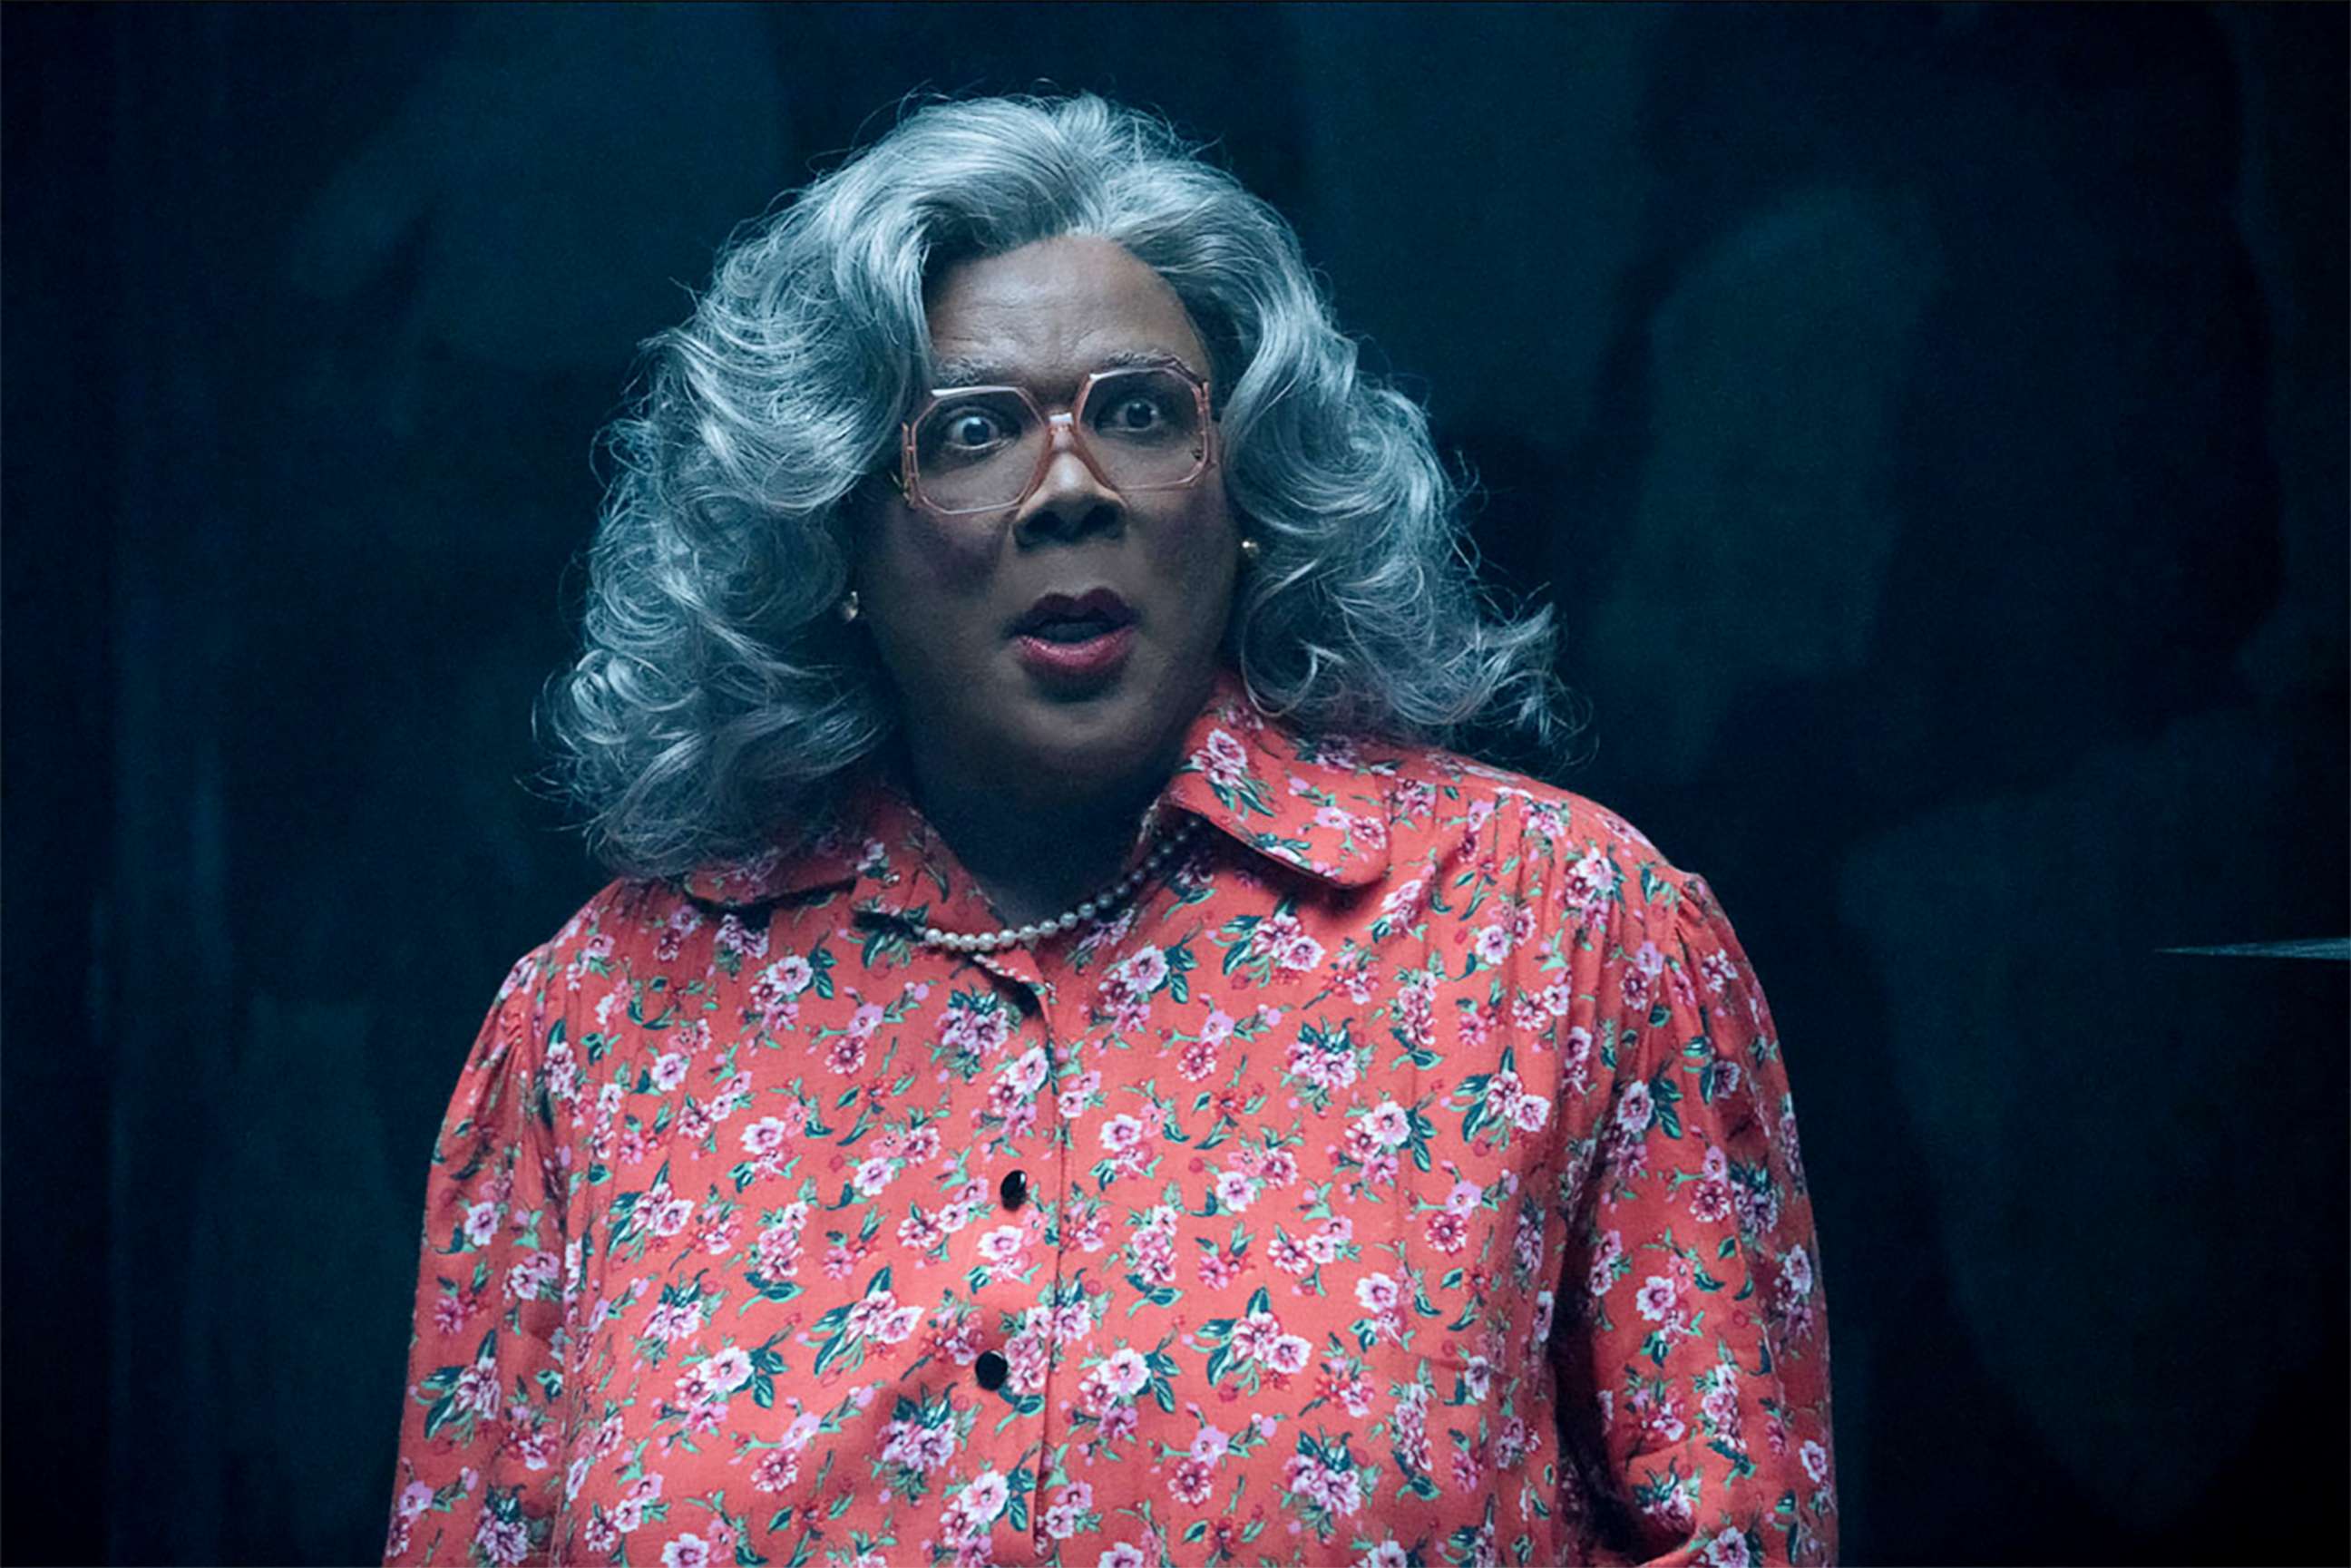 PHOTO: Tyler Perry appears in "Boo 2: A Madea Halloween."